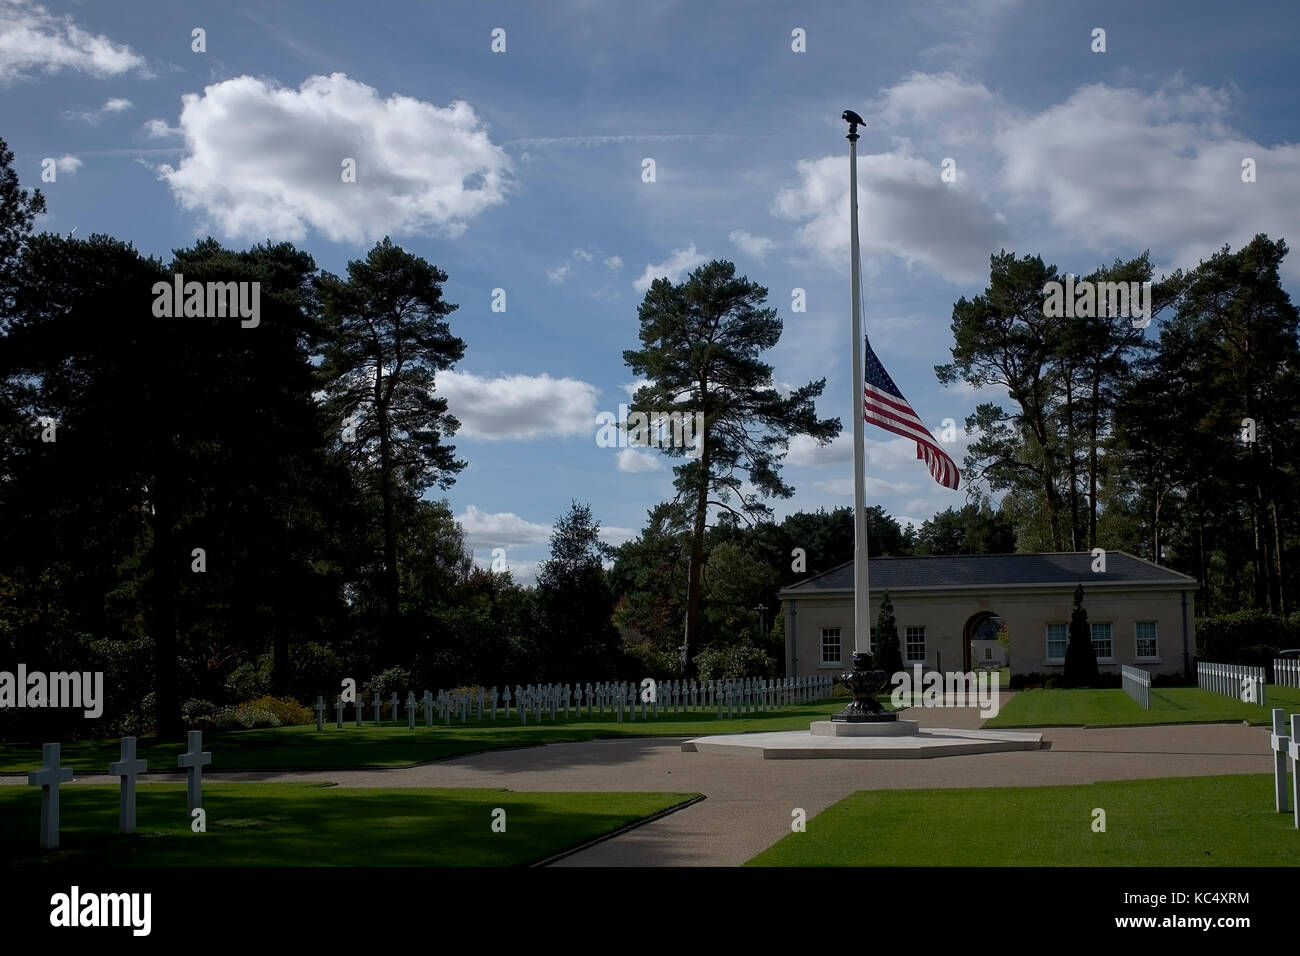 American Battle Monuments Great War Cemetery UK where by Presidential decree the flag of the United States is flown at half-mast in solidarity with the victims of the Las Vegas shooting. Stock Photo